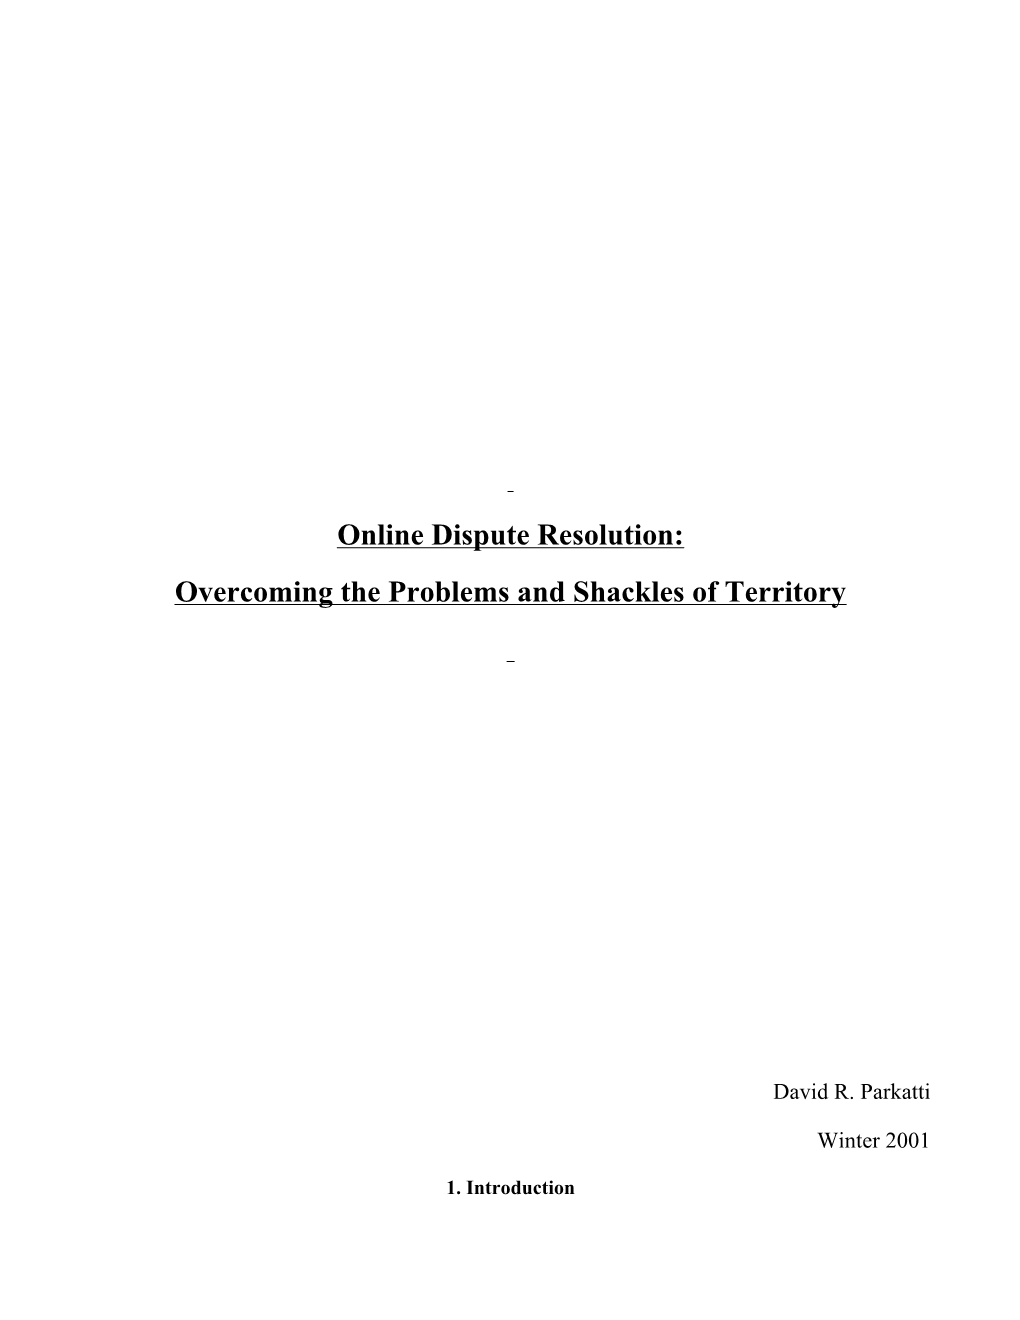 Online Dispute Resolution: Overcoming the Problems and Shackles of Territory